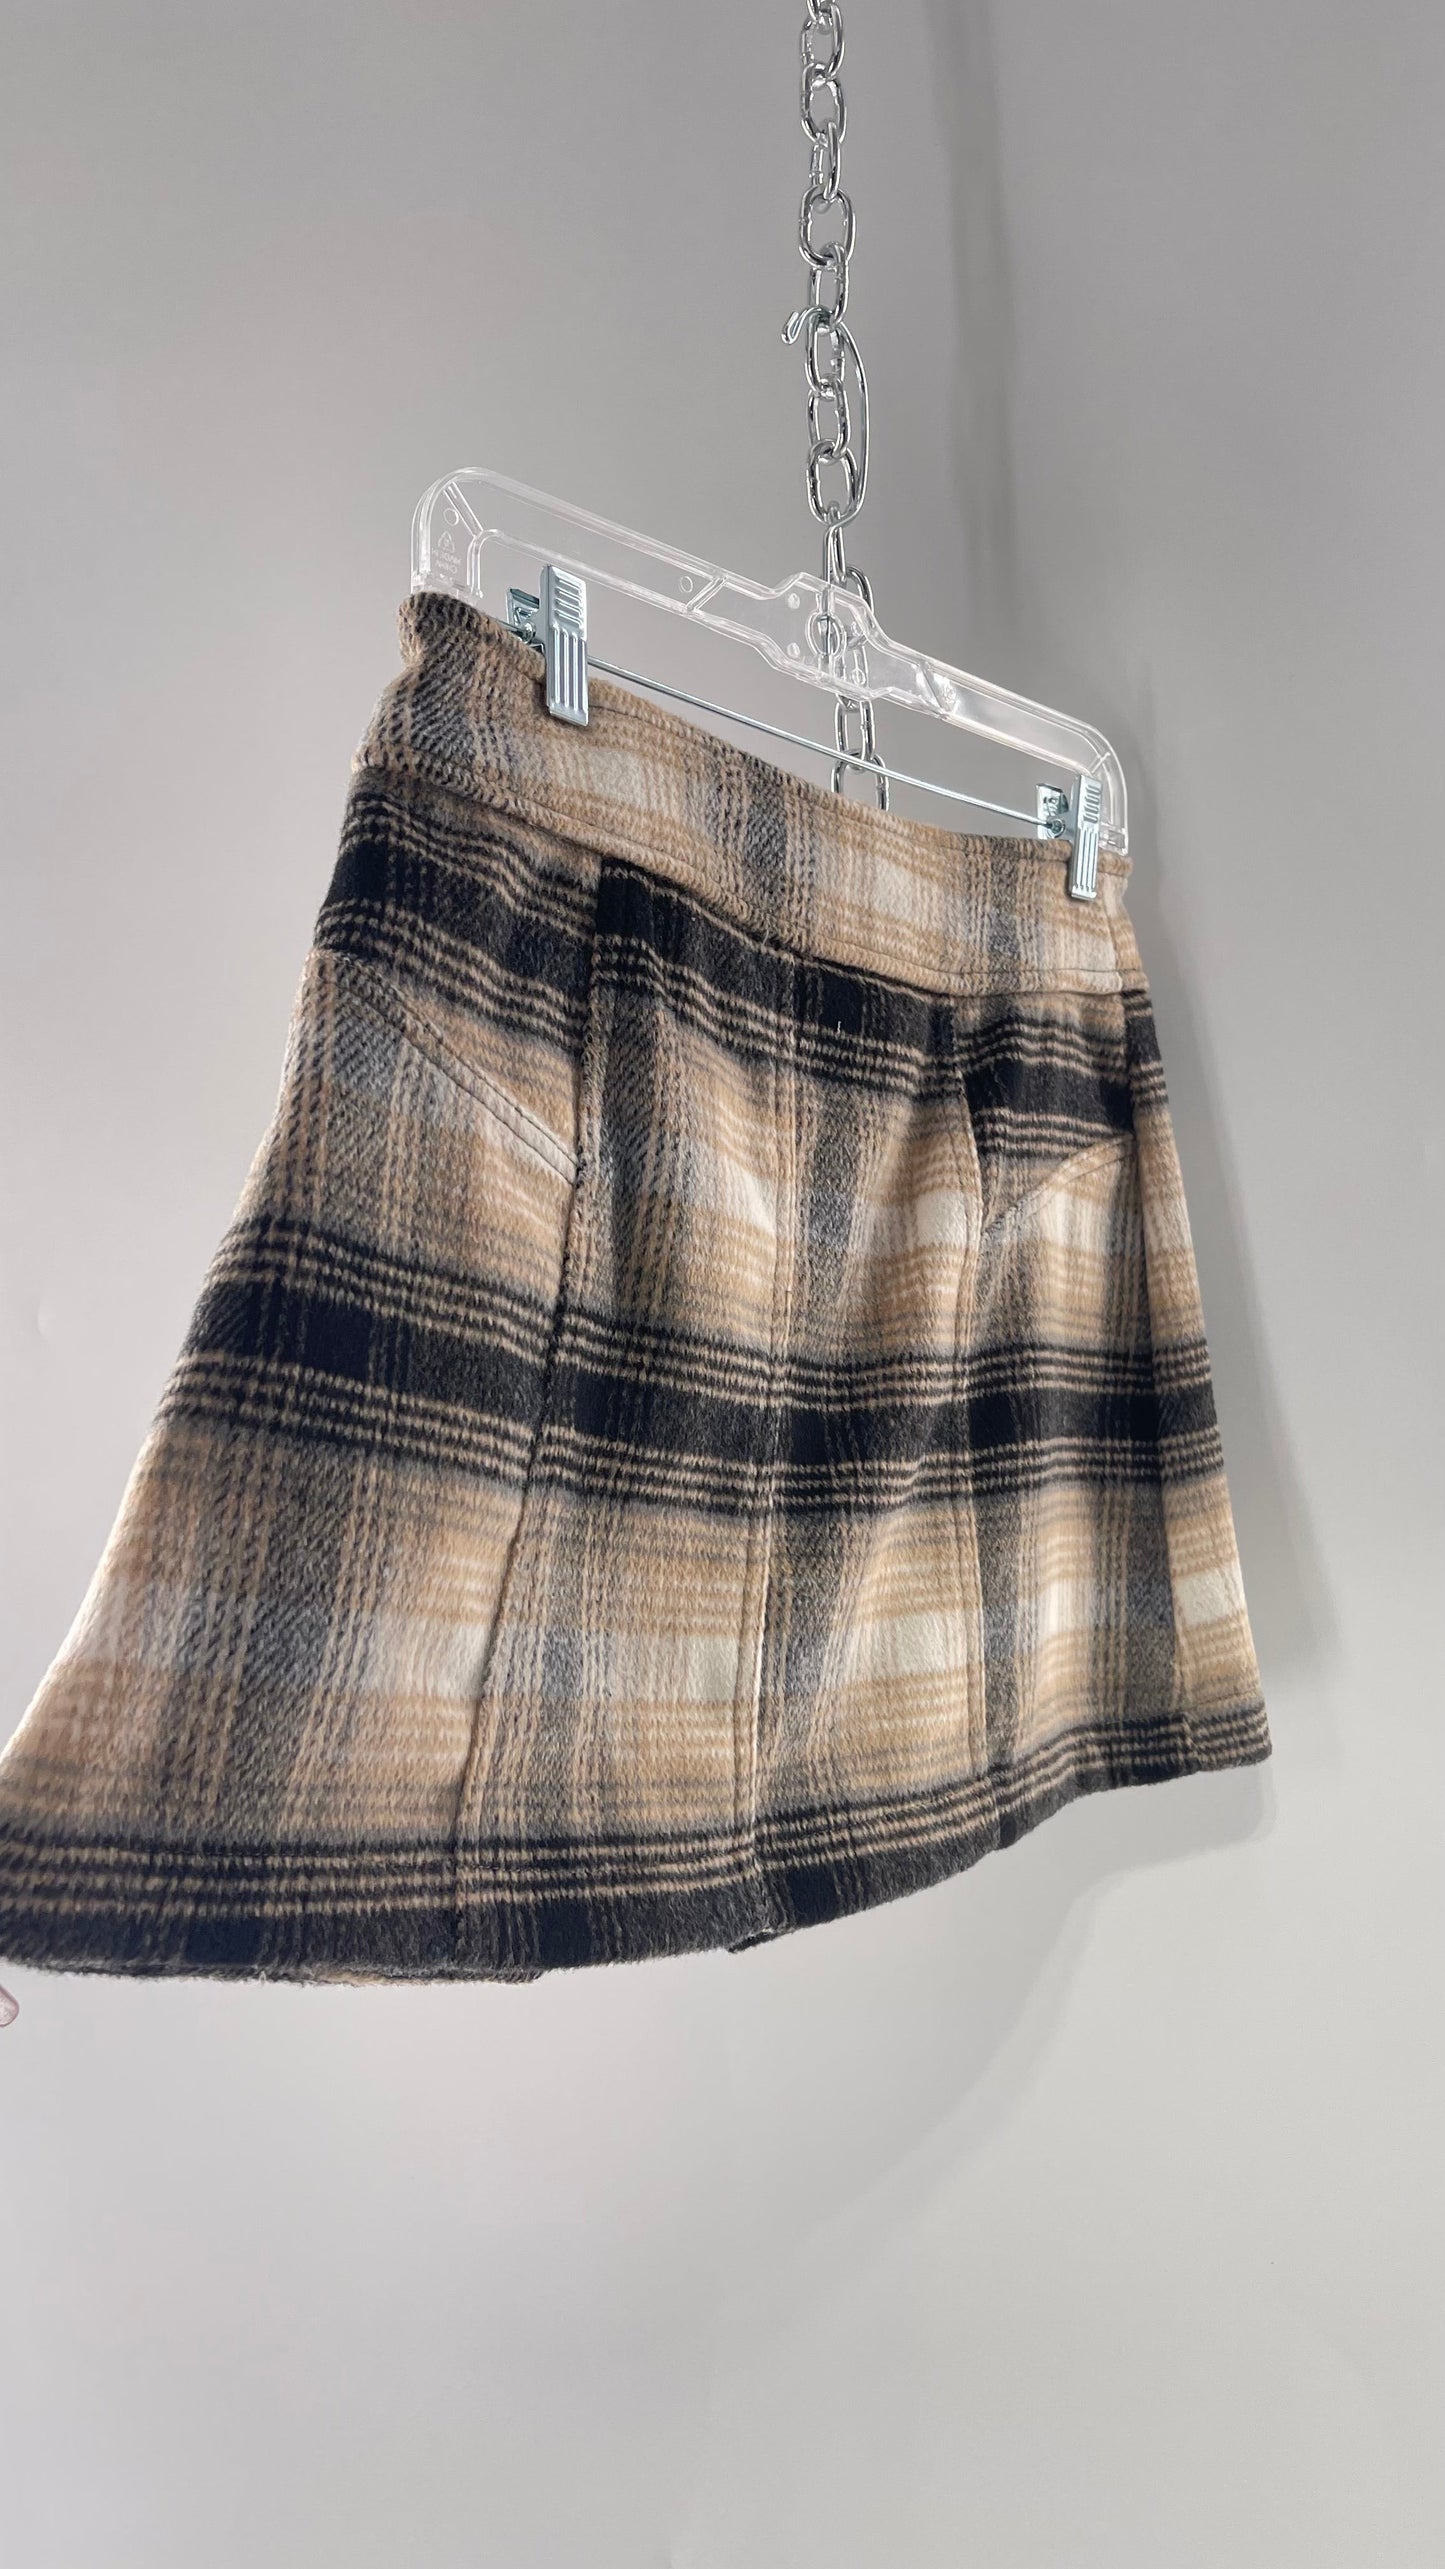 Free People Plaid Beige Gray Soft Mini Skirt with Side Slit and Built in Grommet Belt (4)